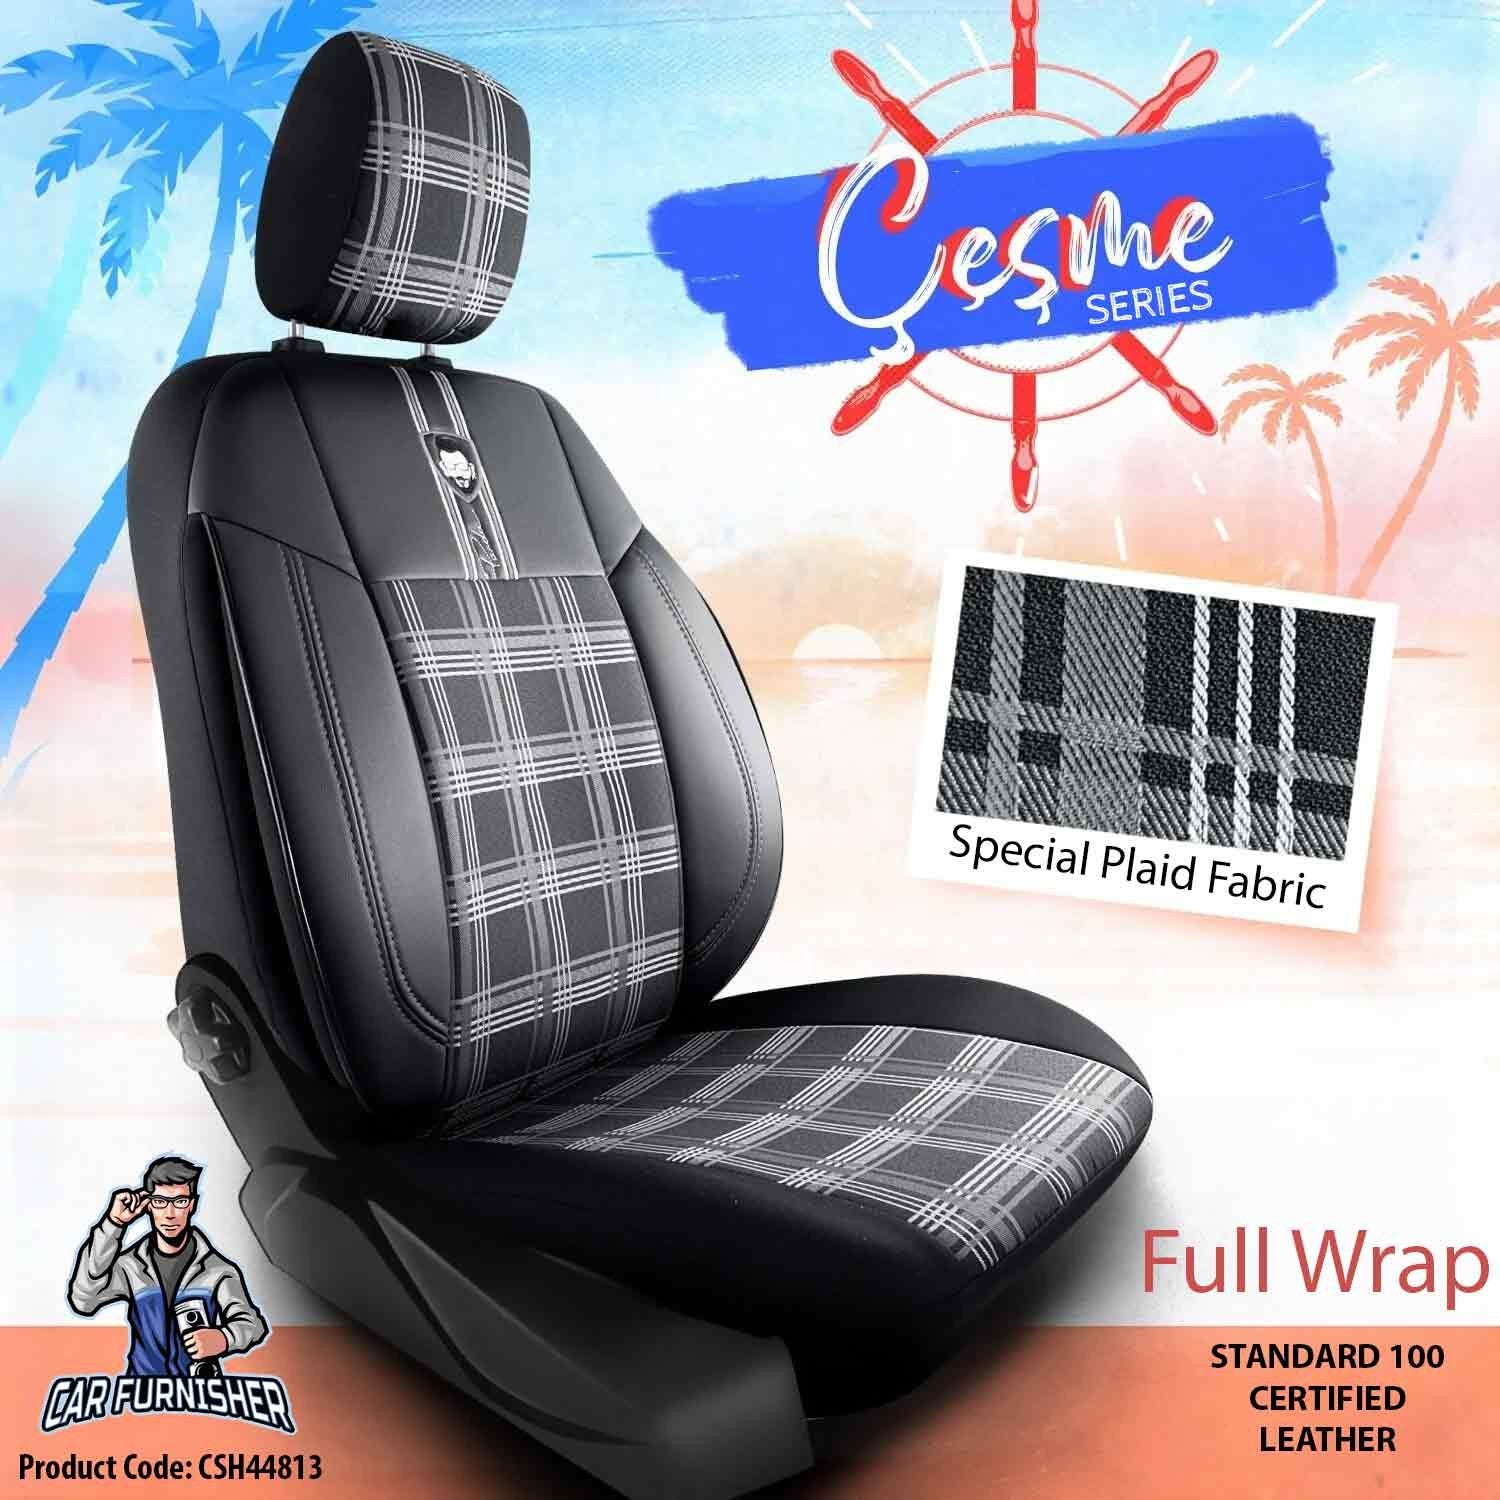 Luxury Car Seat Cover Set (4 Colors) | Cesme Series Gray Leather & Fabric